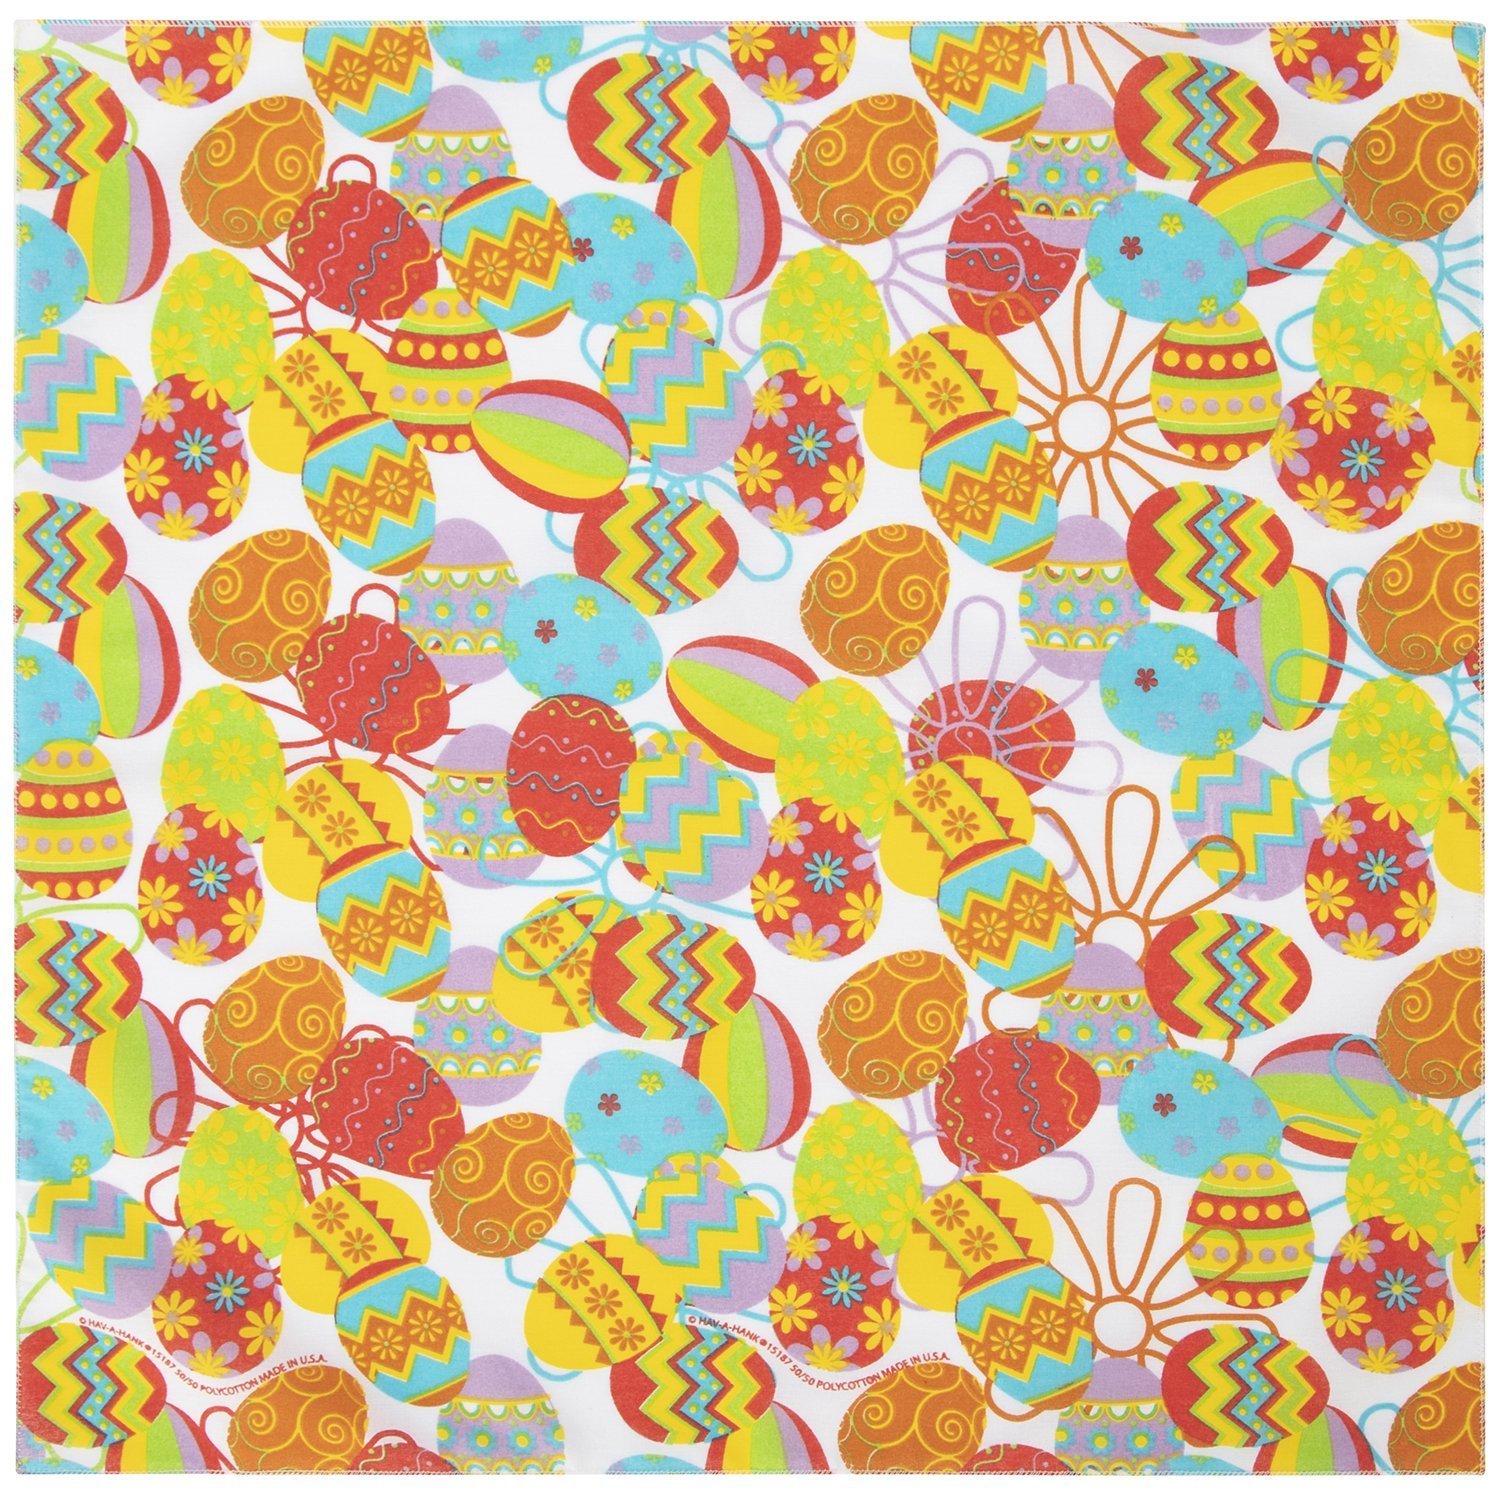 1pc Tossed Easter Eggs Bandana - 22x22 - Made in the USA